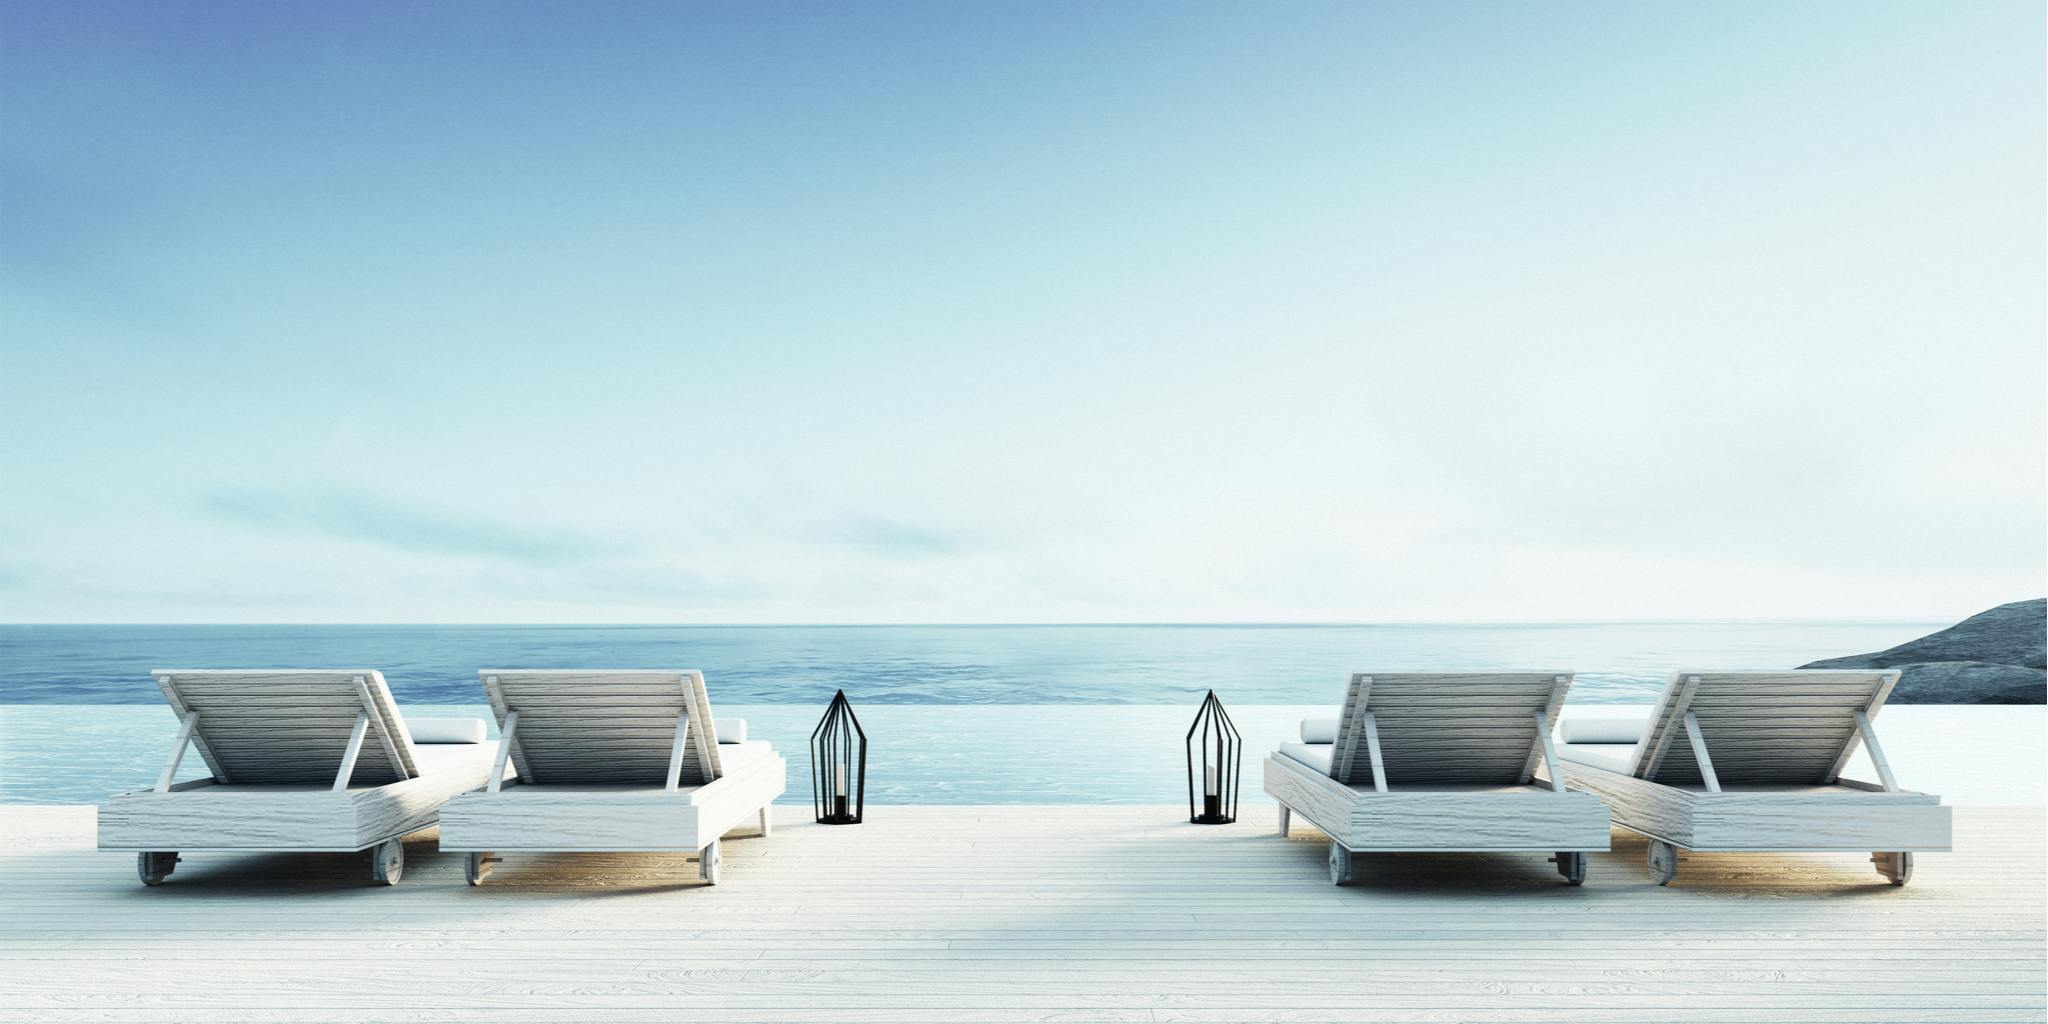 Beach lounge, 4 sun loungers at the edge of a pool and beach